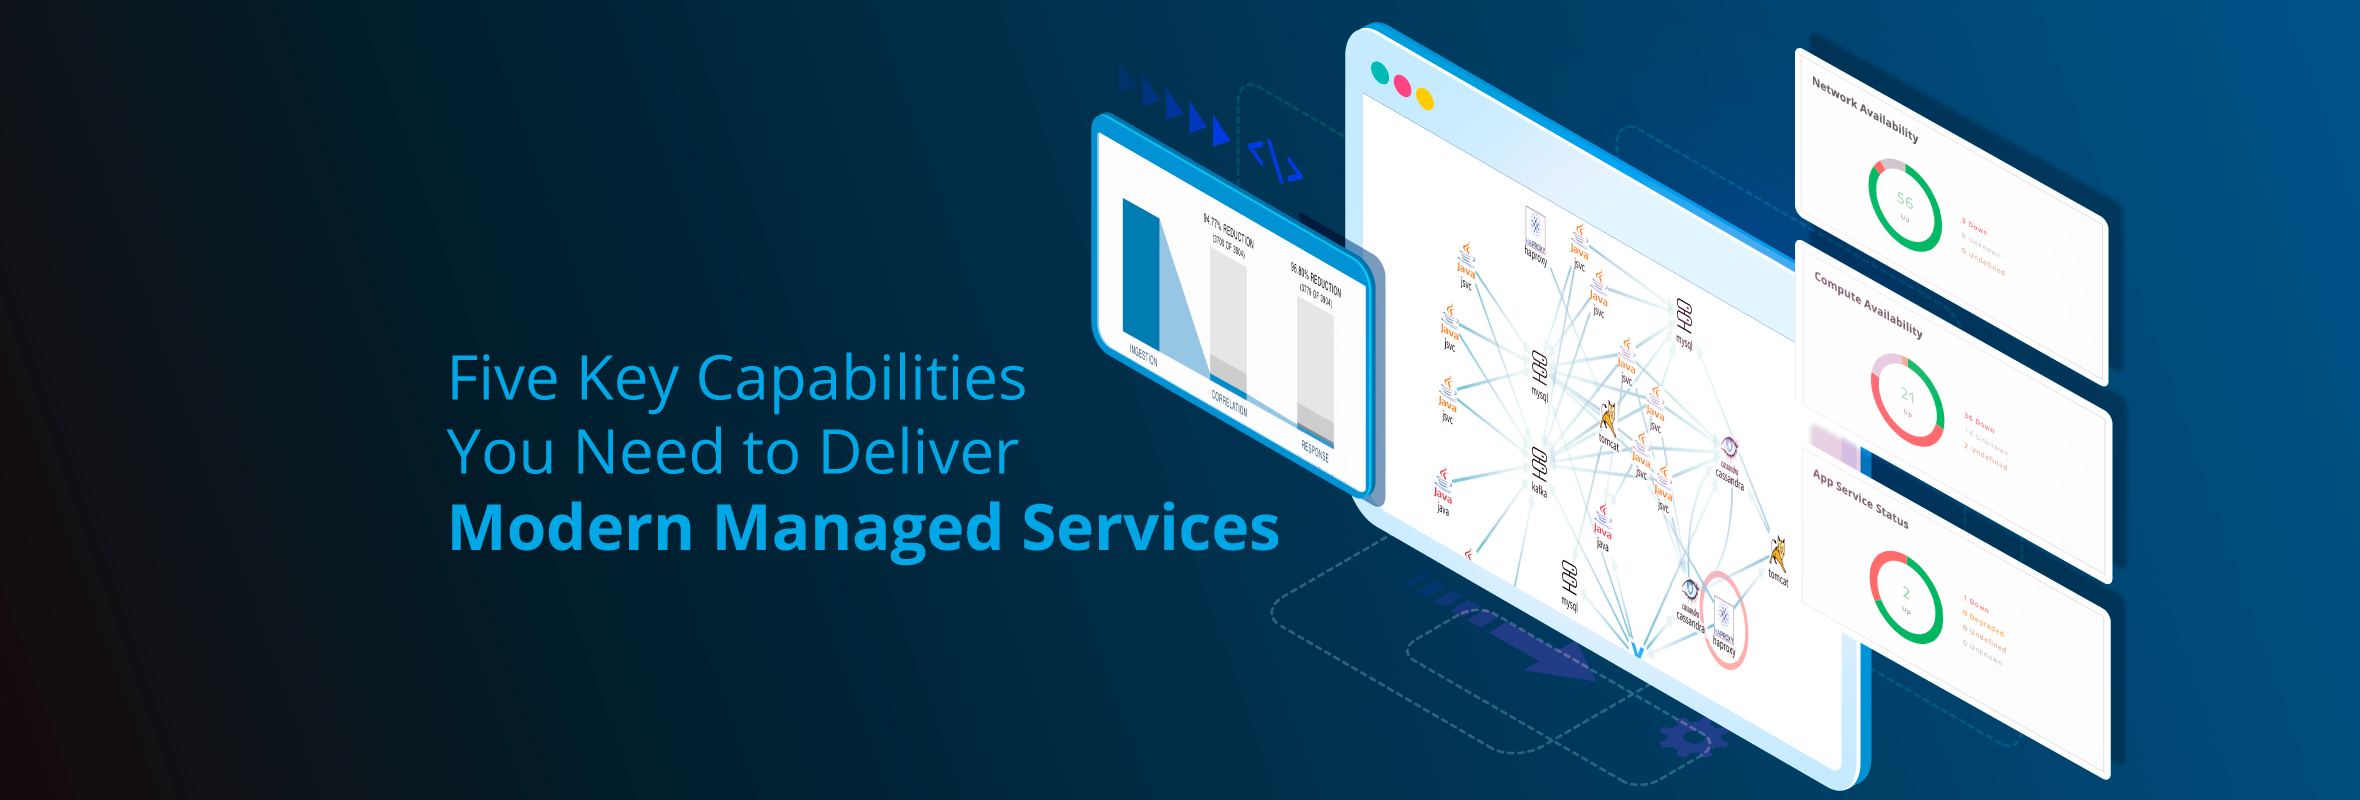 Five Key Capabilities You Need to Deliver Modern Managed Services